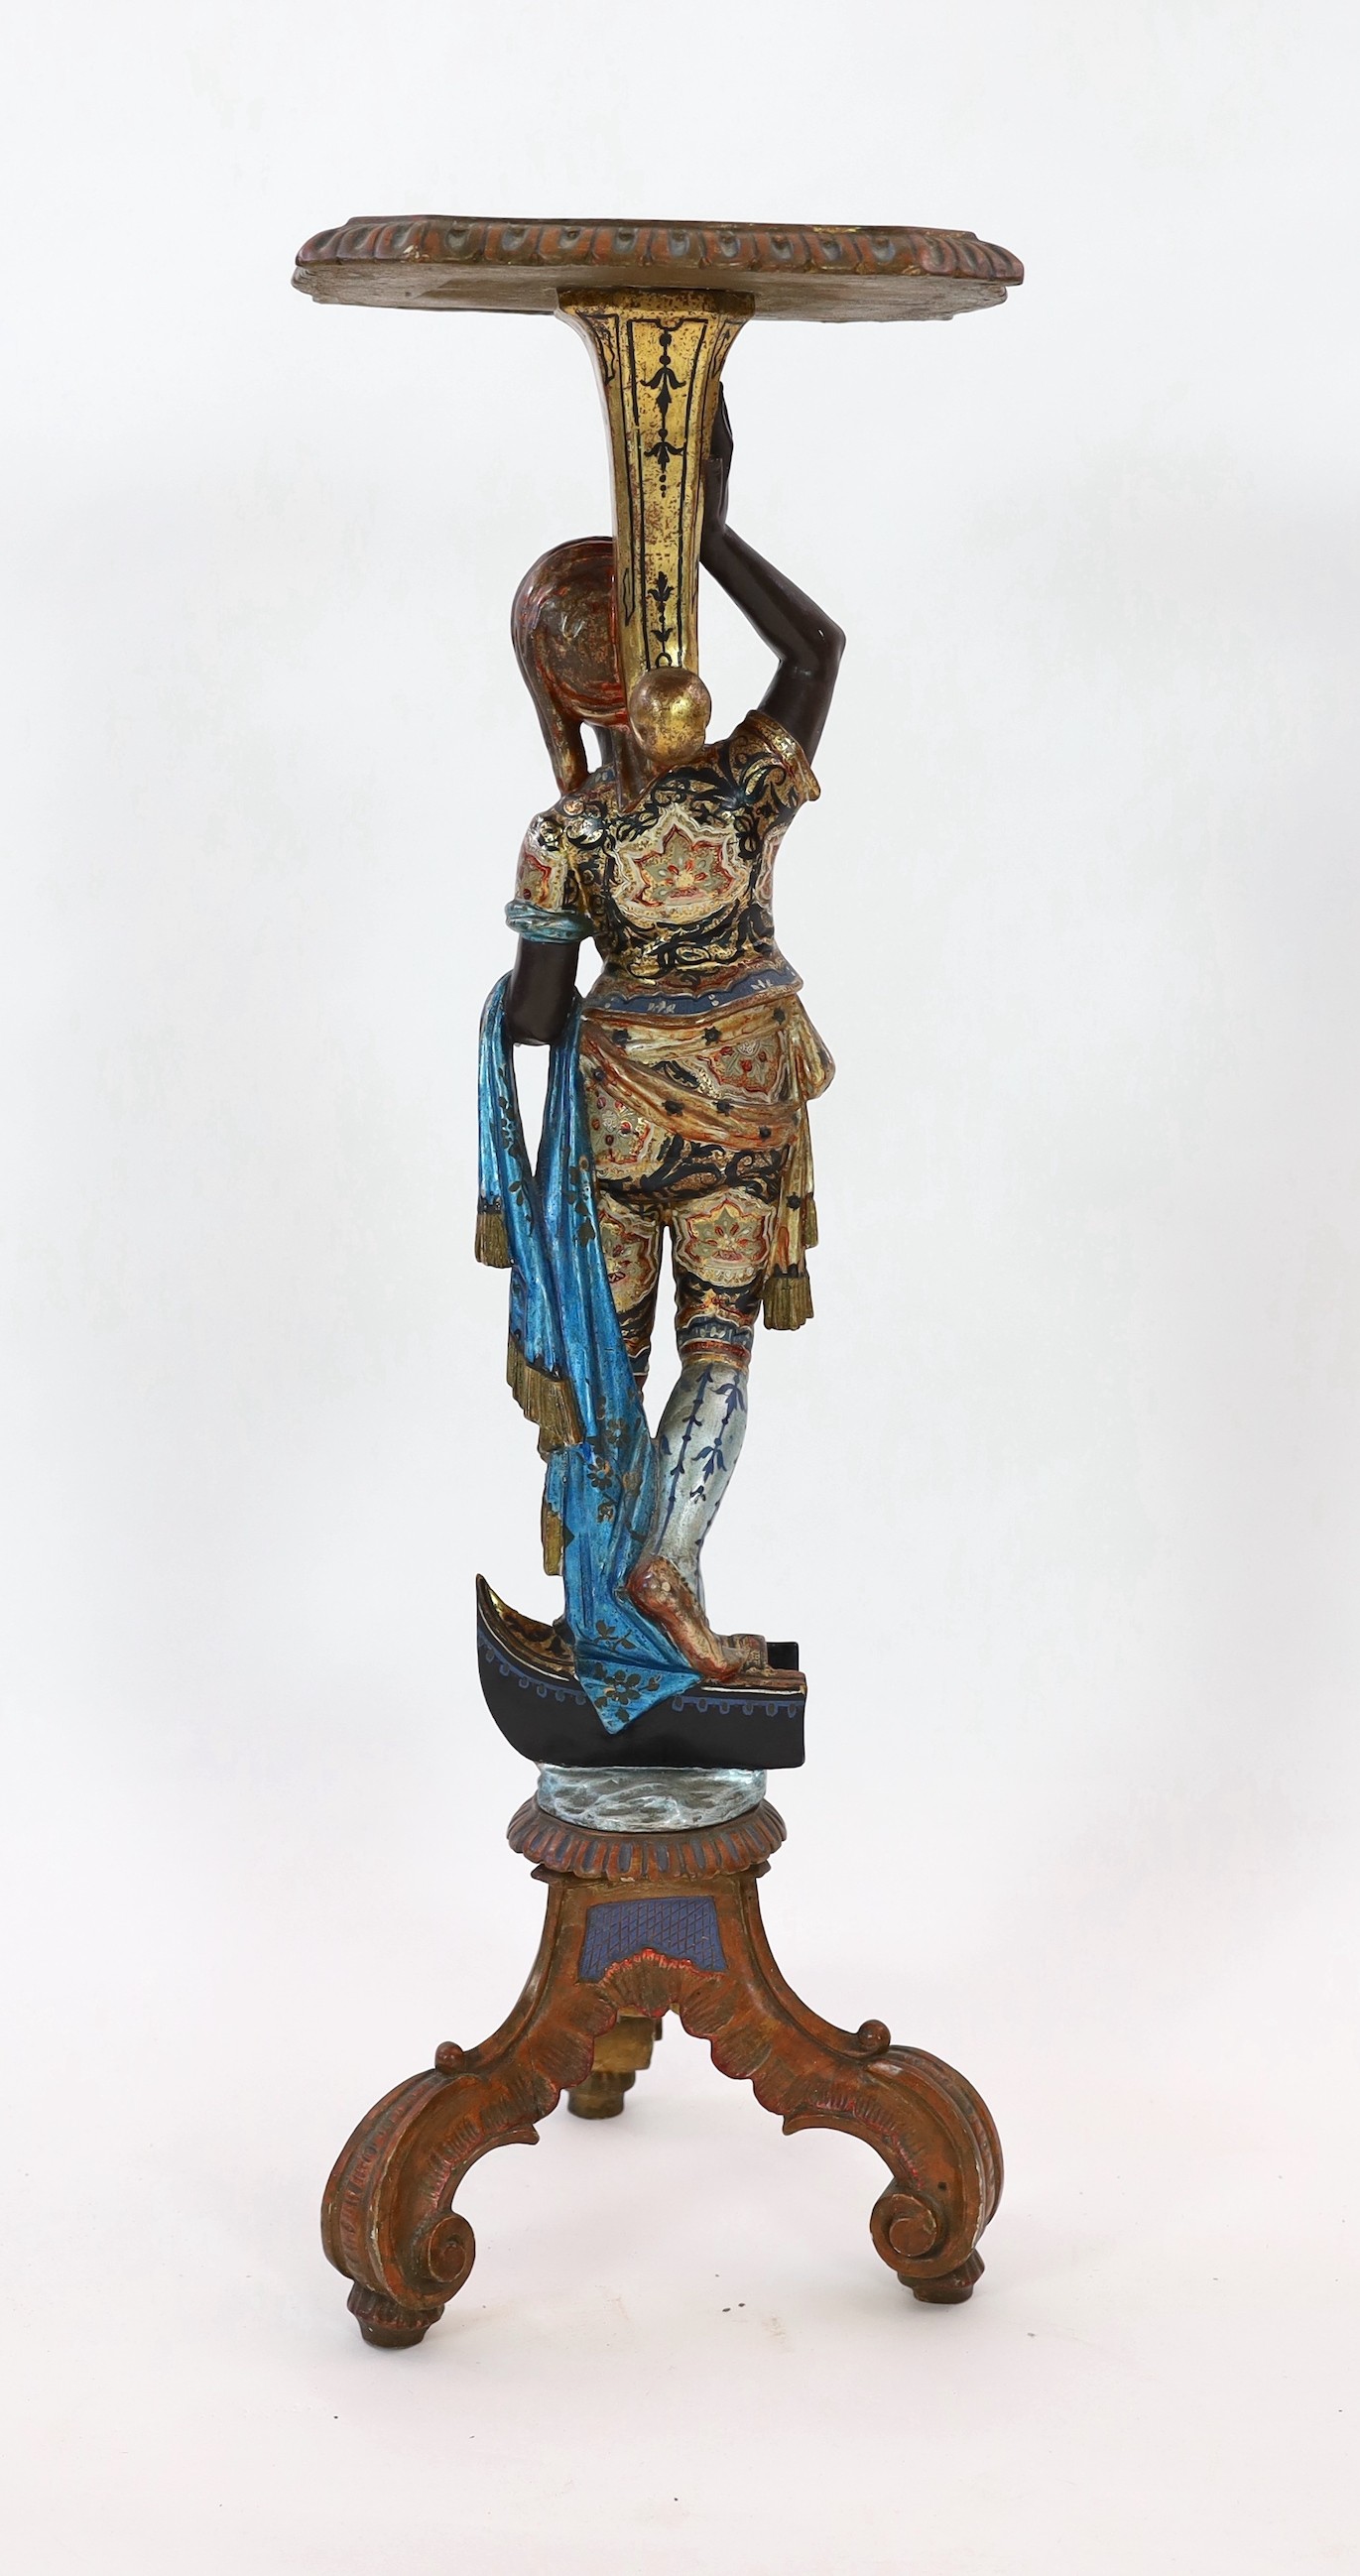 A 19th century Venetian carved wood and polychrome gondolier blackamoor table, the stem carved as - Image 6 of 6